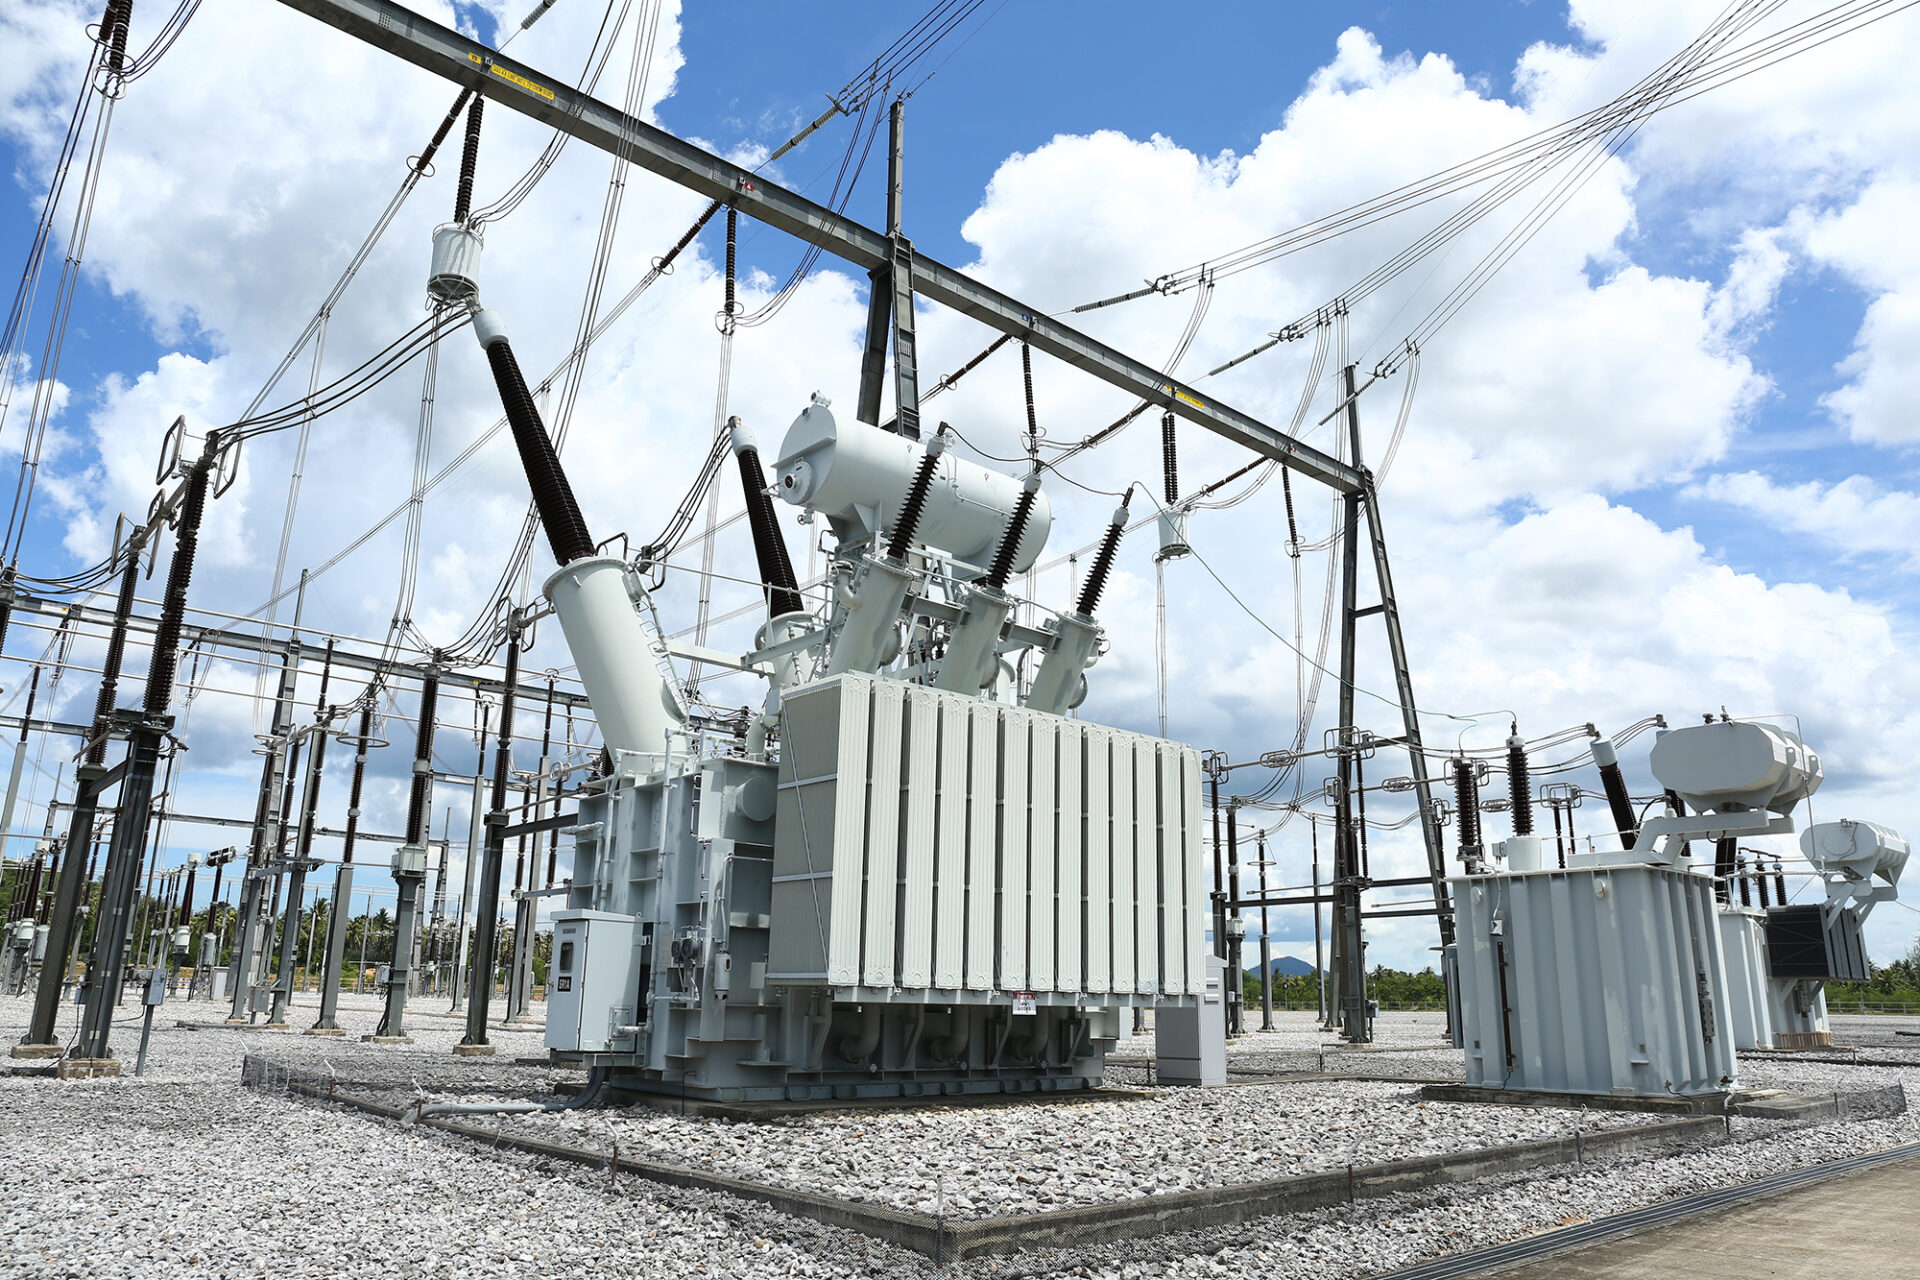 When should I replace an old transformer? - #SINTEFblog